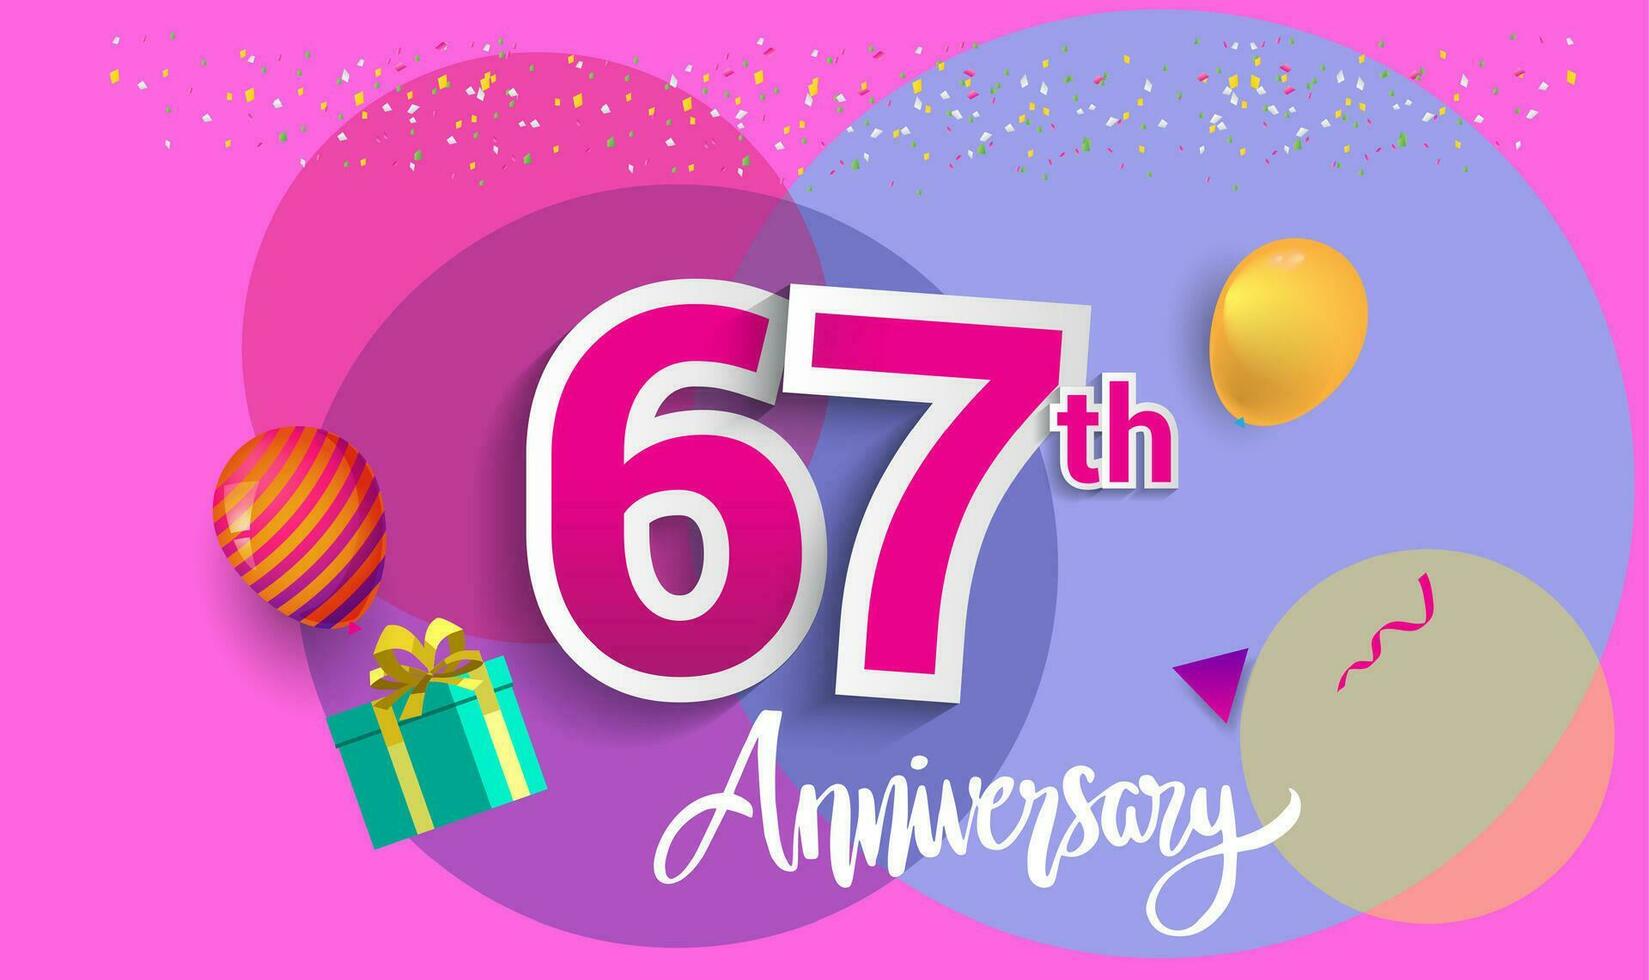 67th Years Anniversary Celebration Design, with gift box and balloons, ribbon, Colorful Vector template elements for your birthday celebrating party.